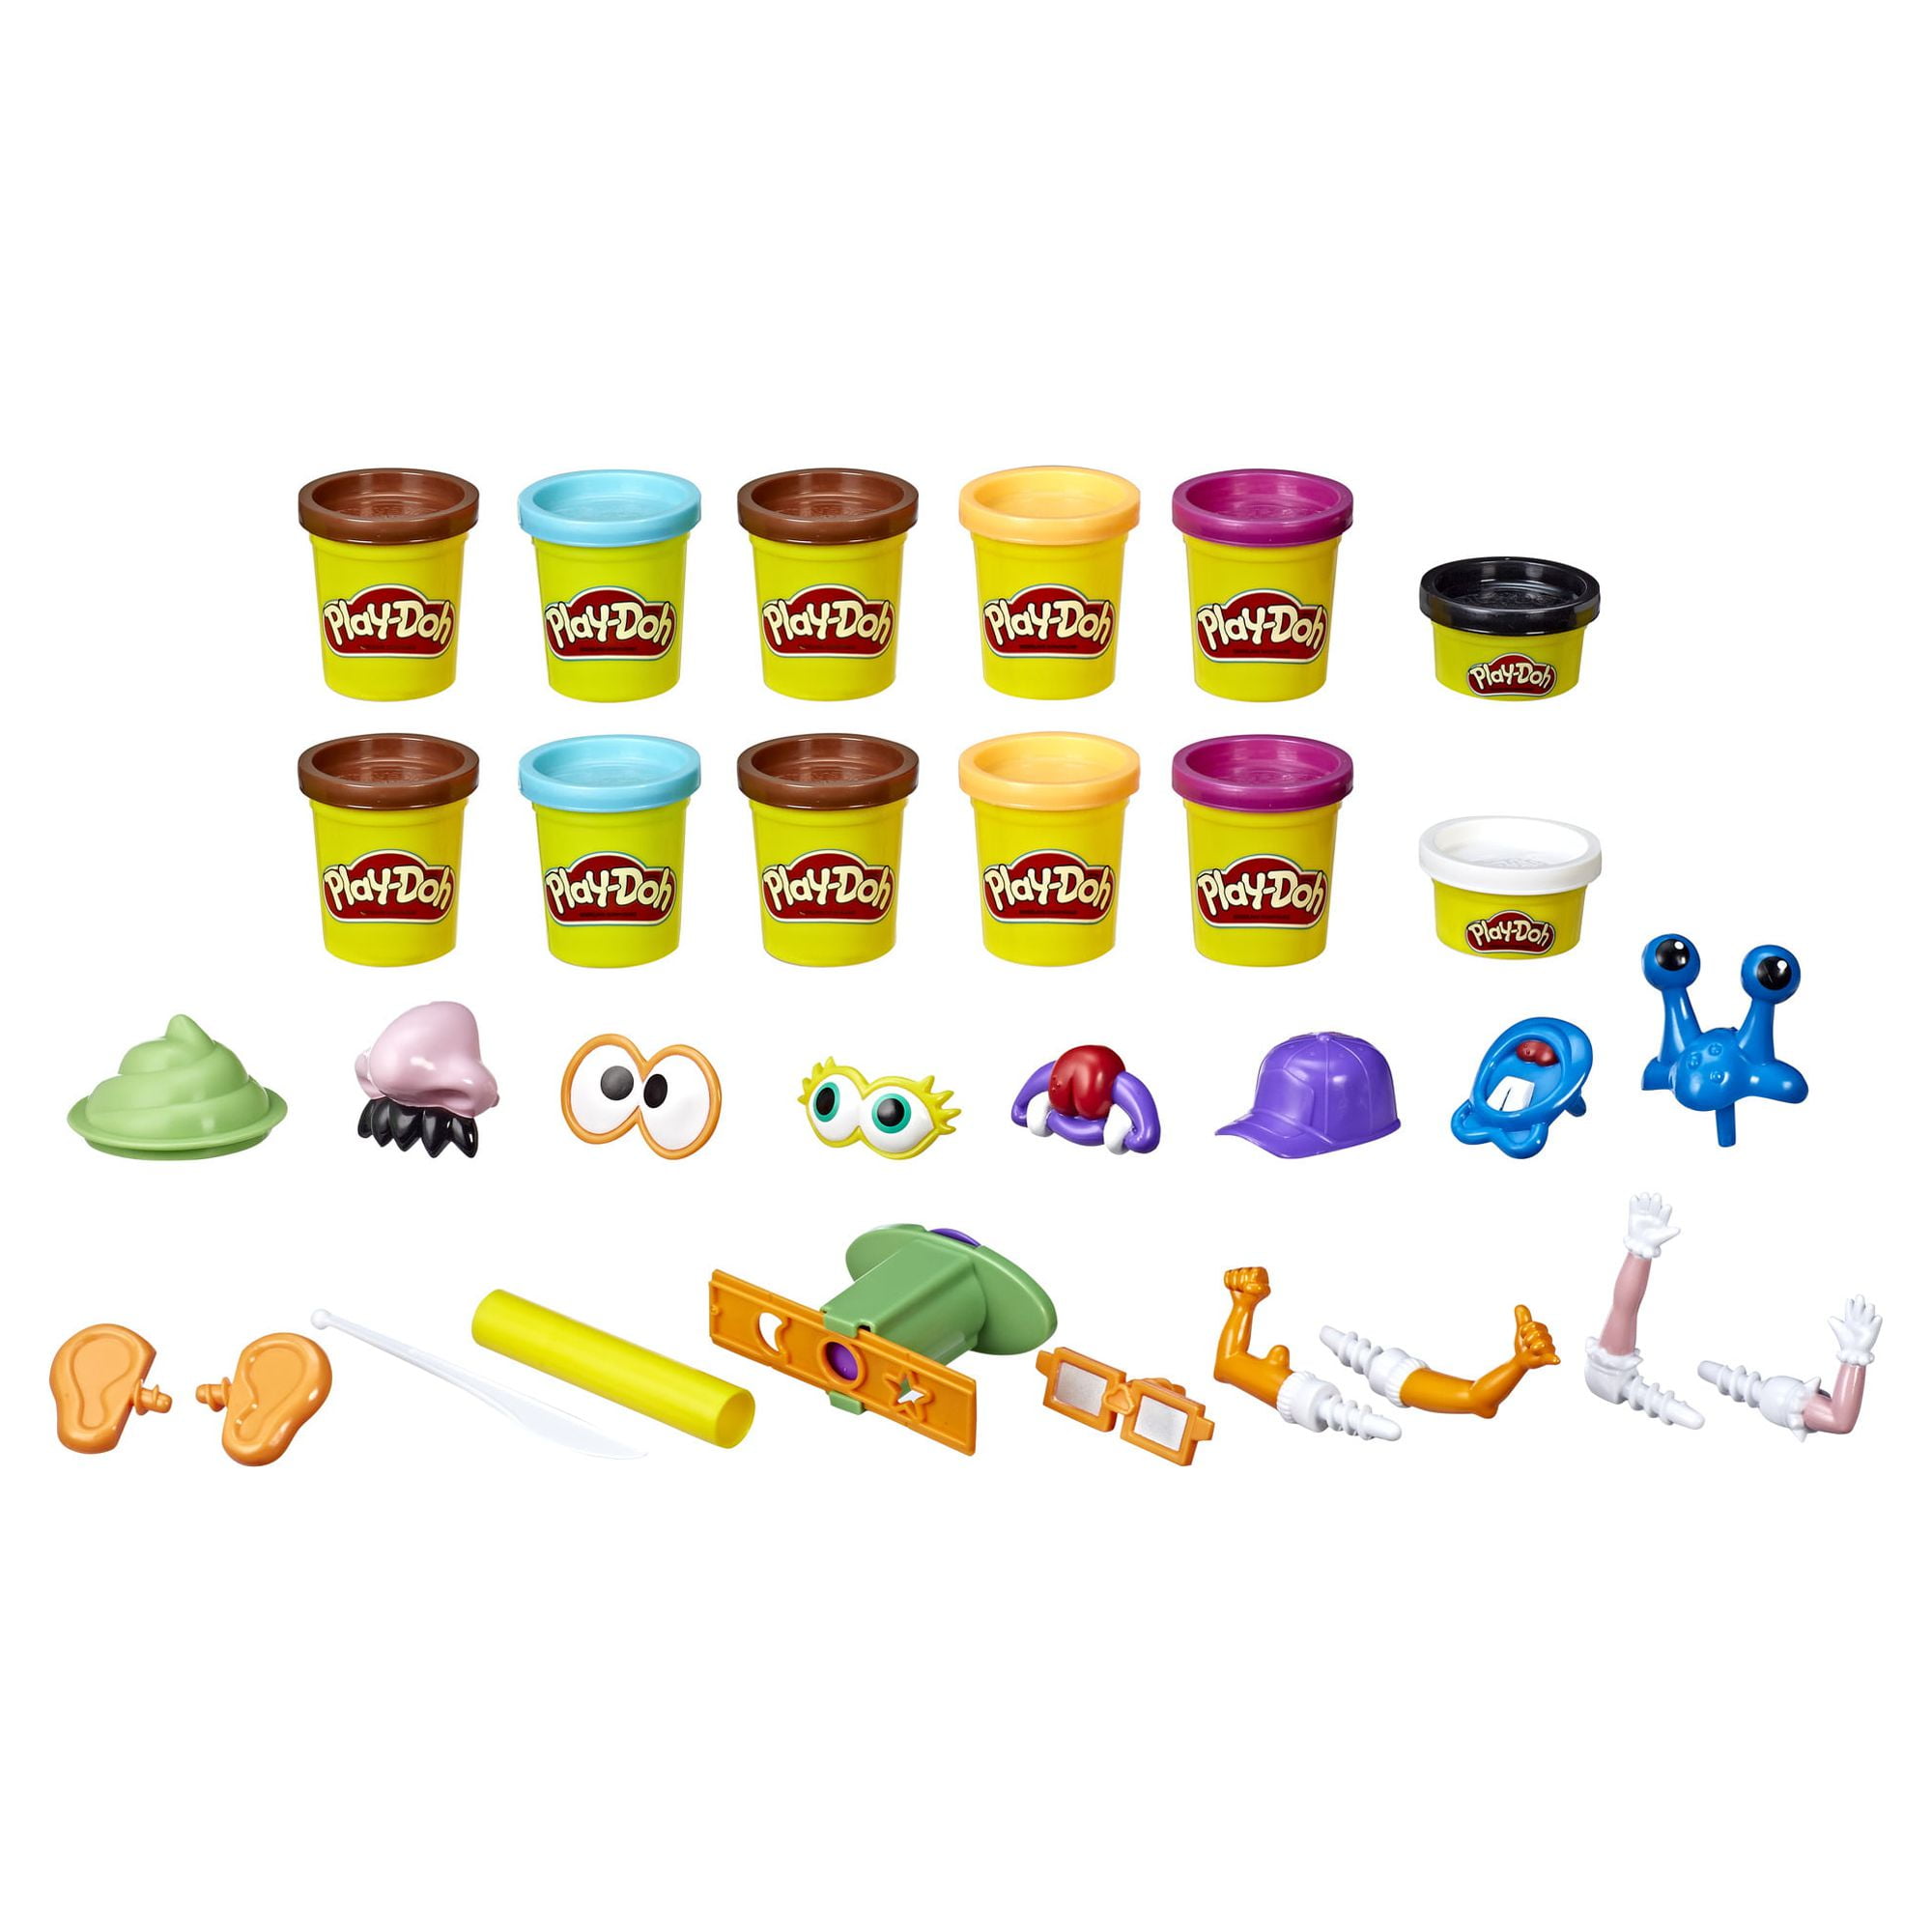 Camp Mom: Play-doh Cap Name Cars - Toddler Approved